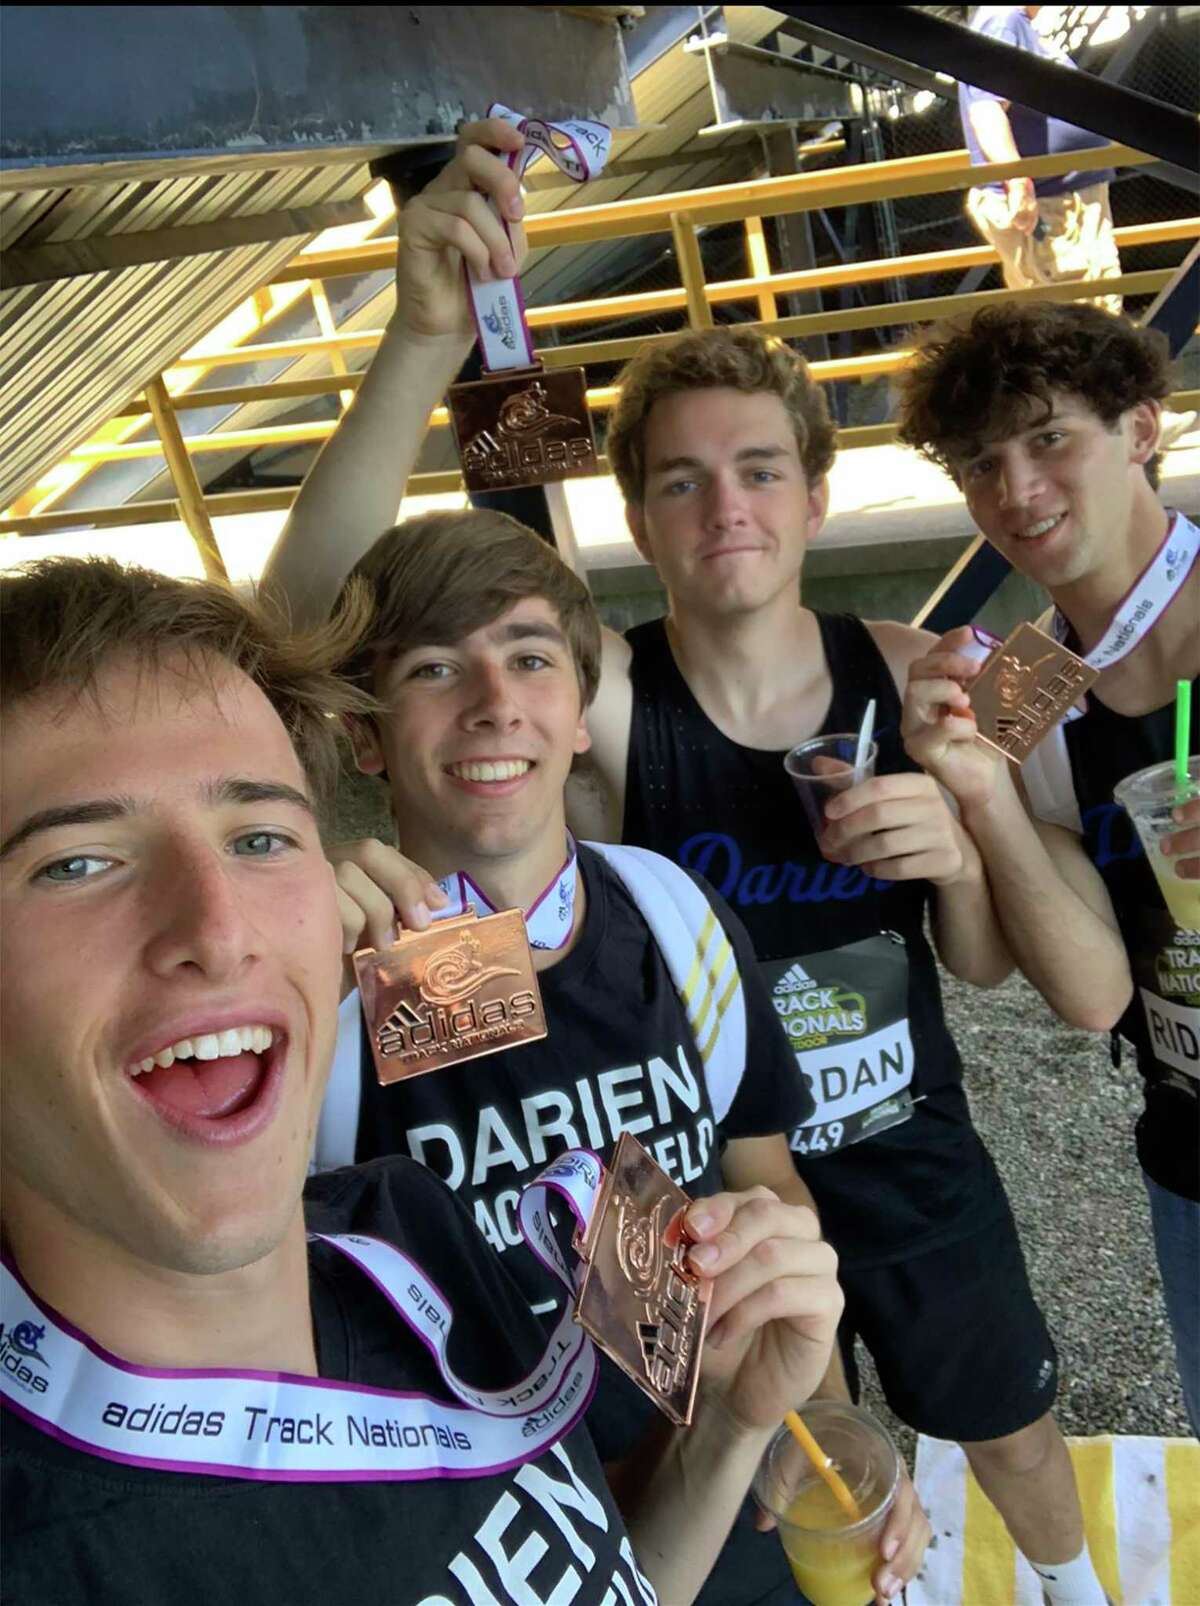 Darien’s 4x400 relay team of Jason Rideout, Luke Riordan, Owen Wagner and Kyle Bloomer finished fourth at the Adidas Outdoor Nationals track and field meet in North Carolina on Sunday, June 19.